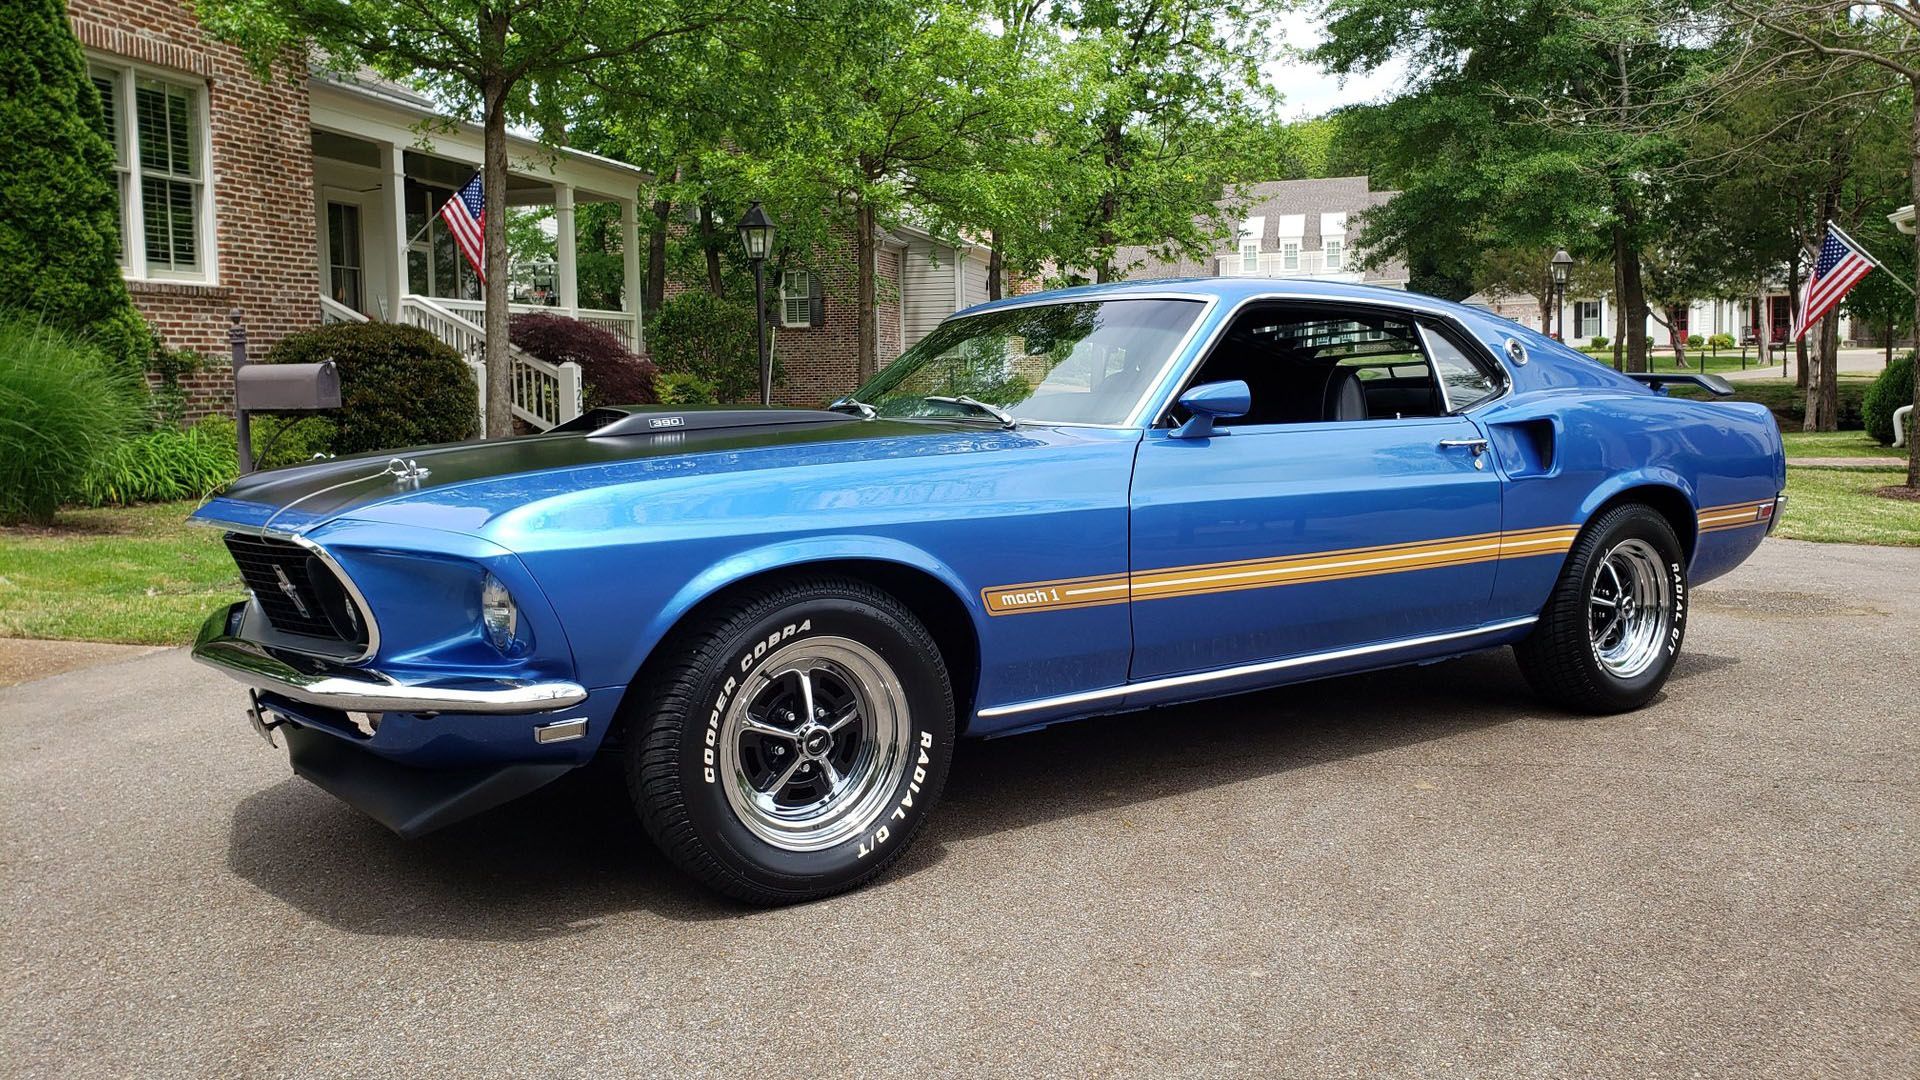 Mustang Mach Resto Mod Restored Classic Ford Mustang For Sale | My XXX ...